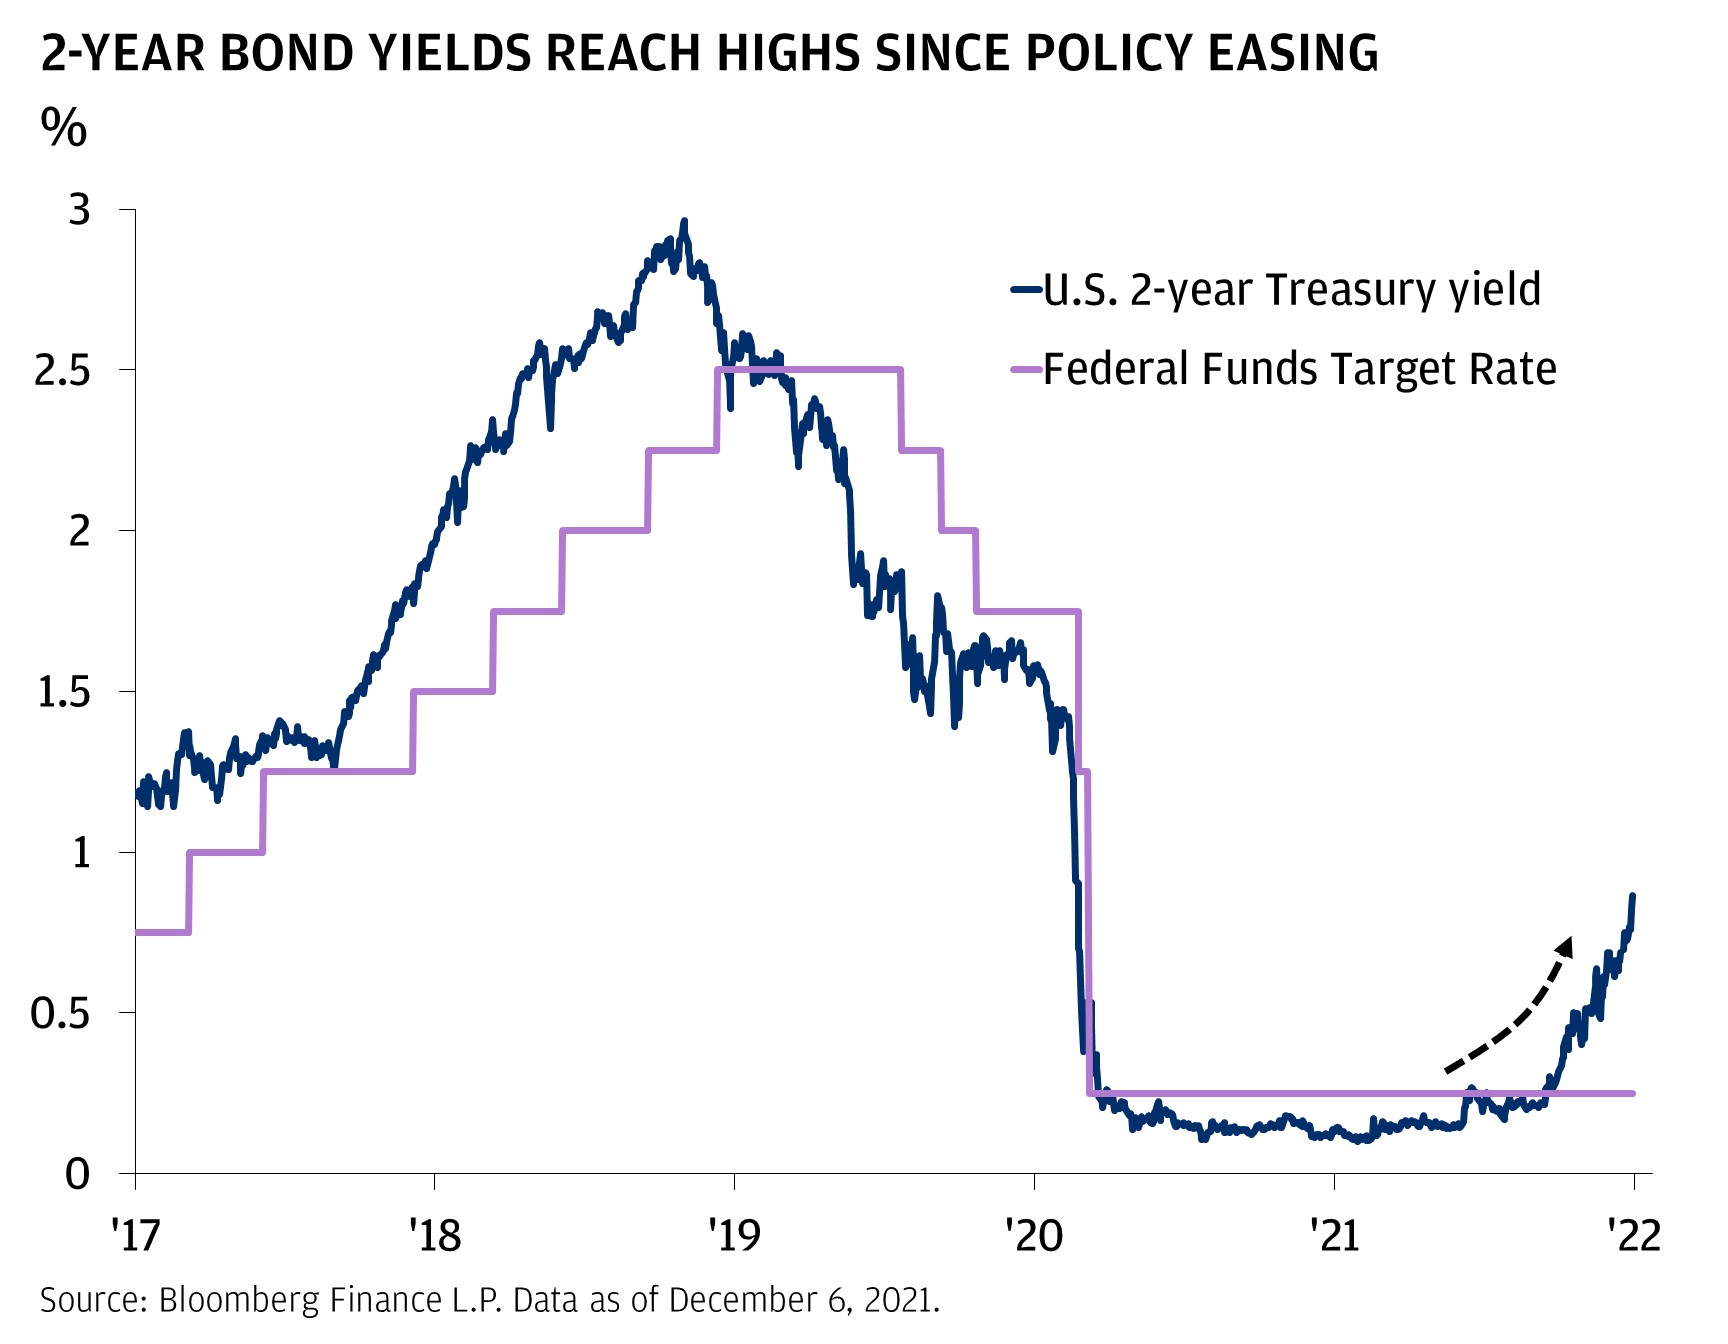  2-Year Bond Yields Reach Highs Since Policy Easing